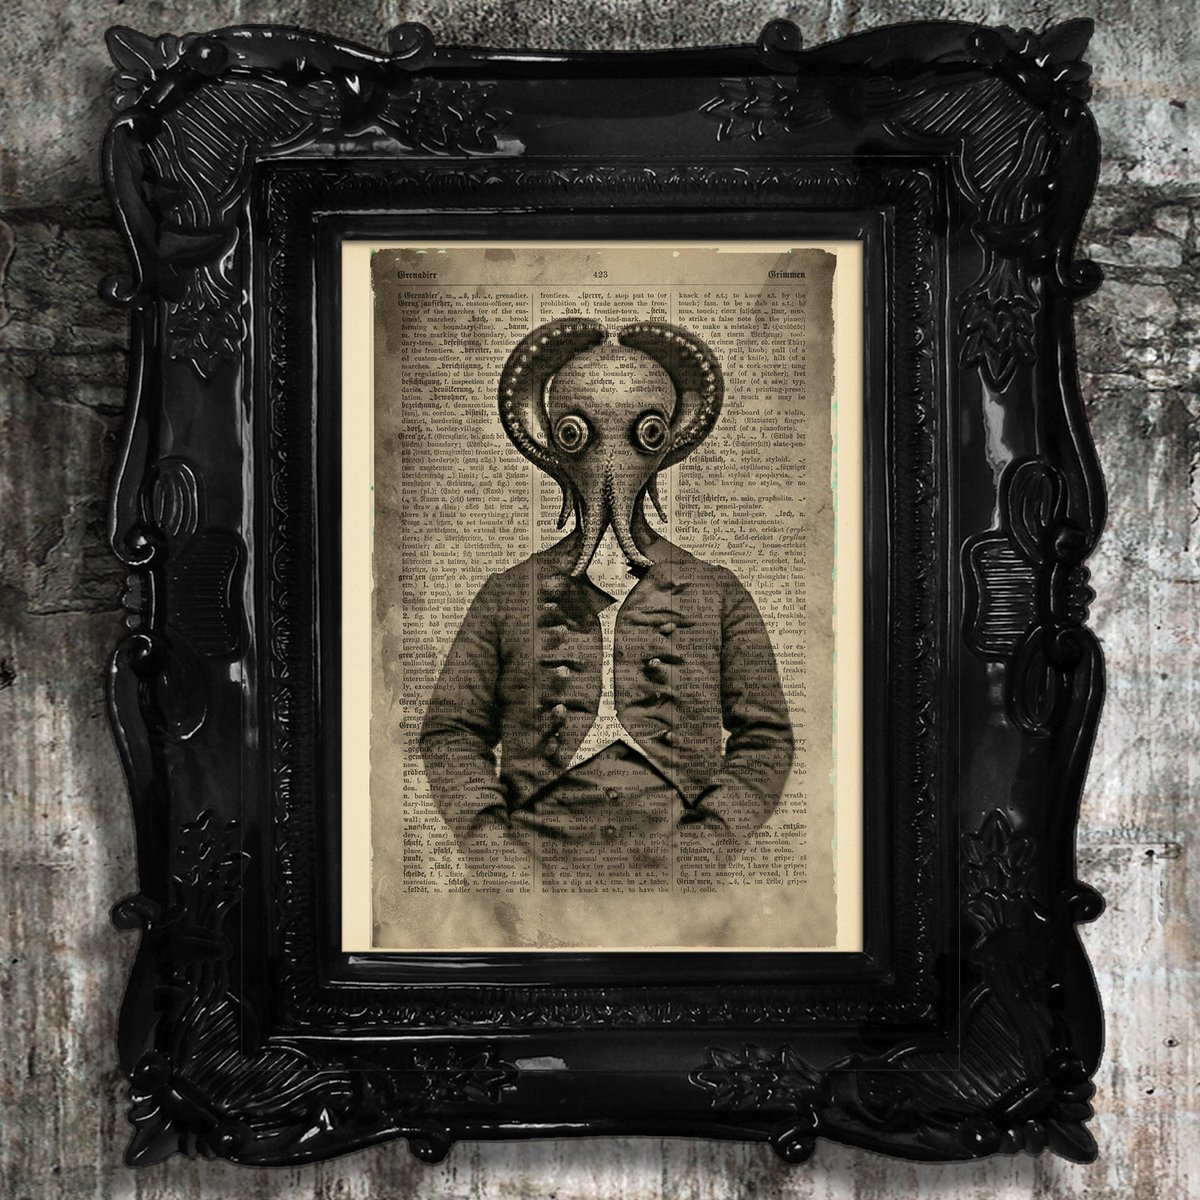 Squid Aquaman Victorian Gothic Art on Vintage Dictionary Page
artcursor.com/products/squid…
#victorian #vintage #gothic #antique #art #antiques #steampunk #victorianstyle #homedecor #victorianhome #vintagestyle #vintagephotography #creepy #bizarre #surreal #dark #gothic #horror #gift